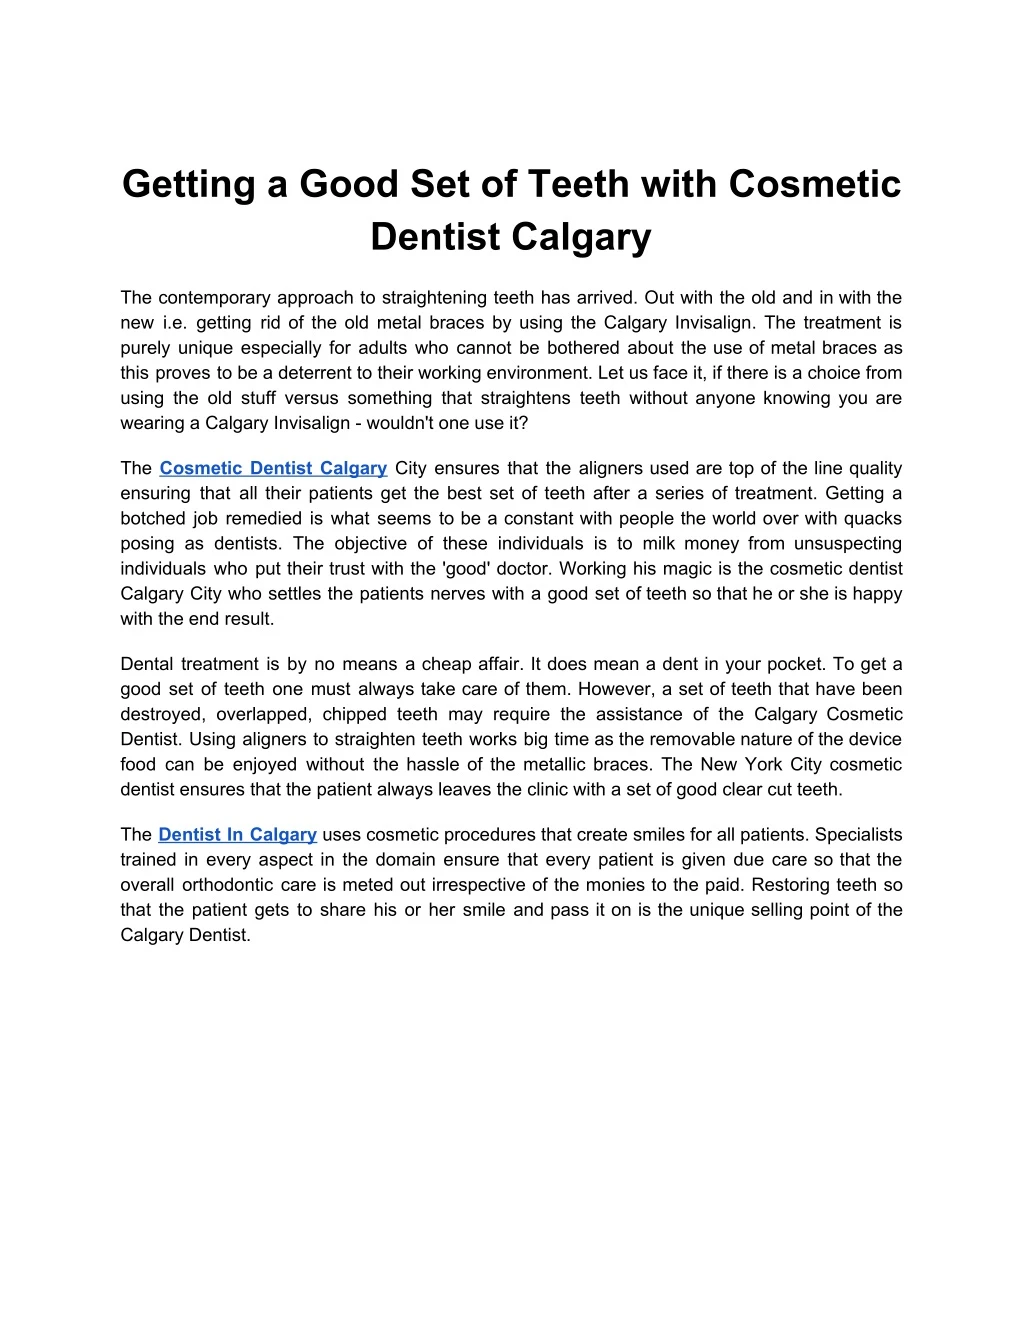 getting a good set of teeth with cosmetic dentist